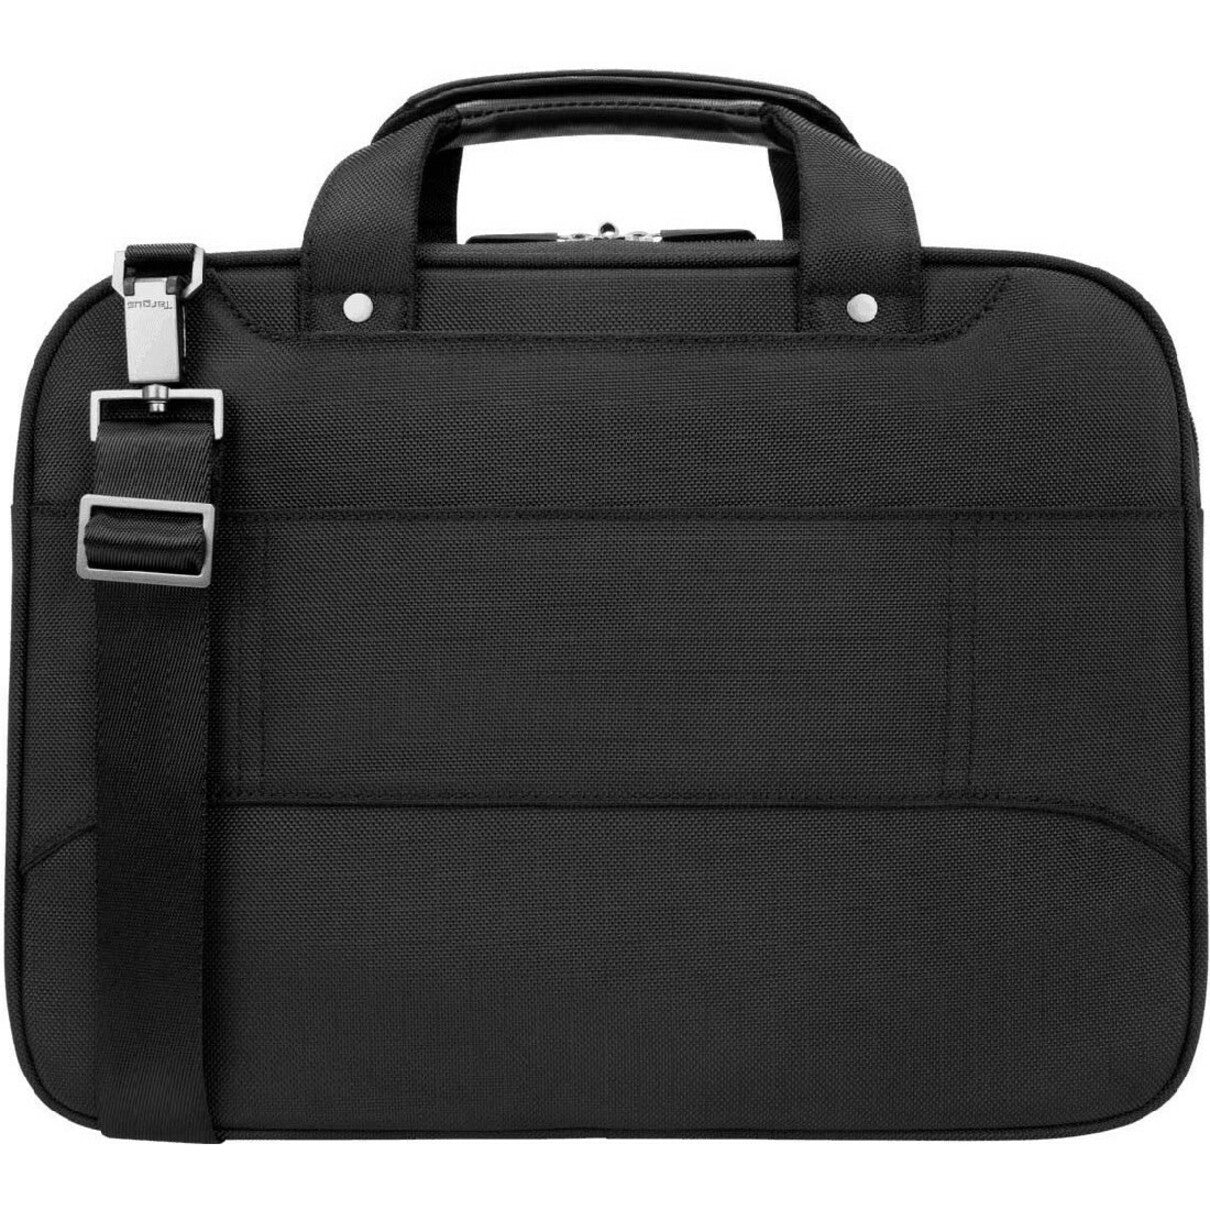 Targus Corporate Traveler CUCT02UA14S Carrying Case (Briefcase) for 14" Notebook, Tablet - Black Rear image